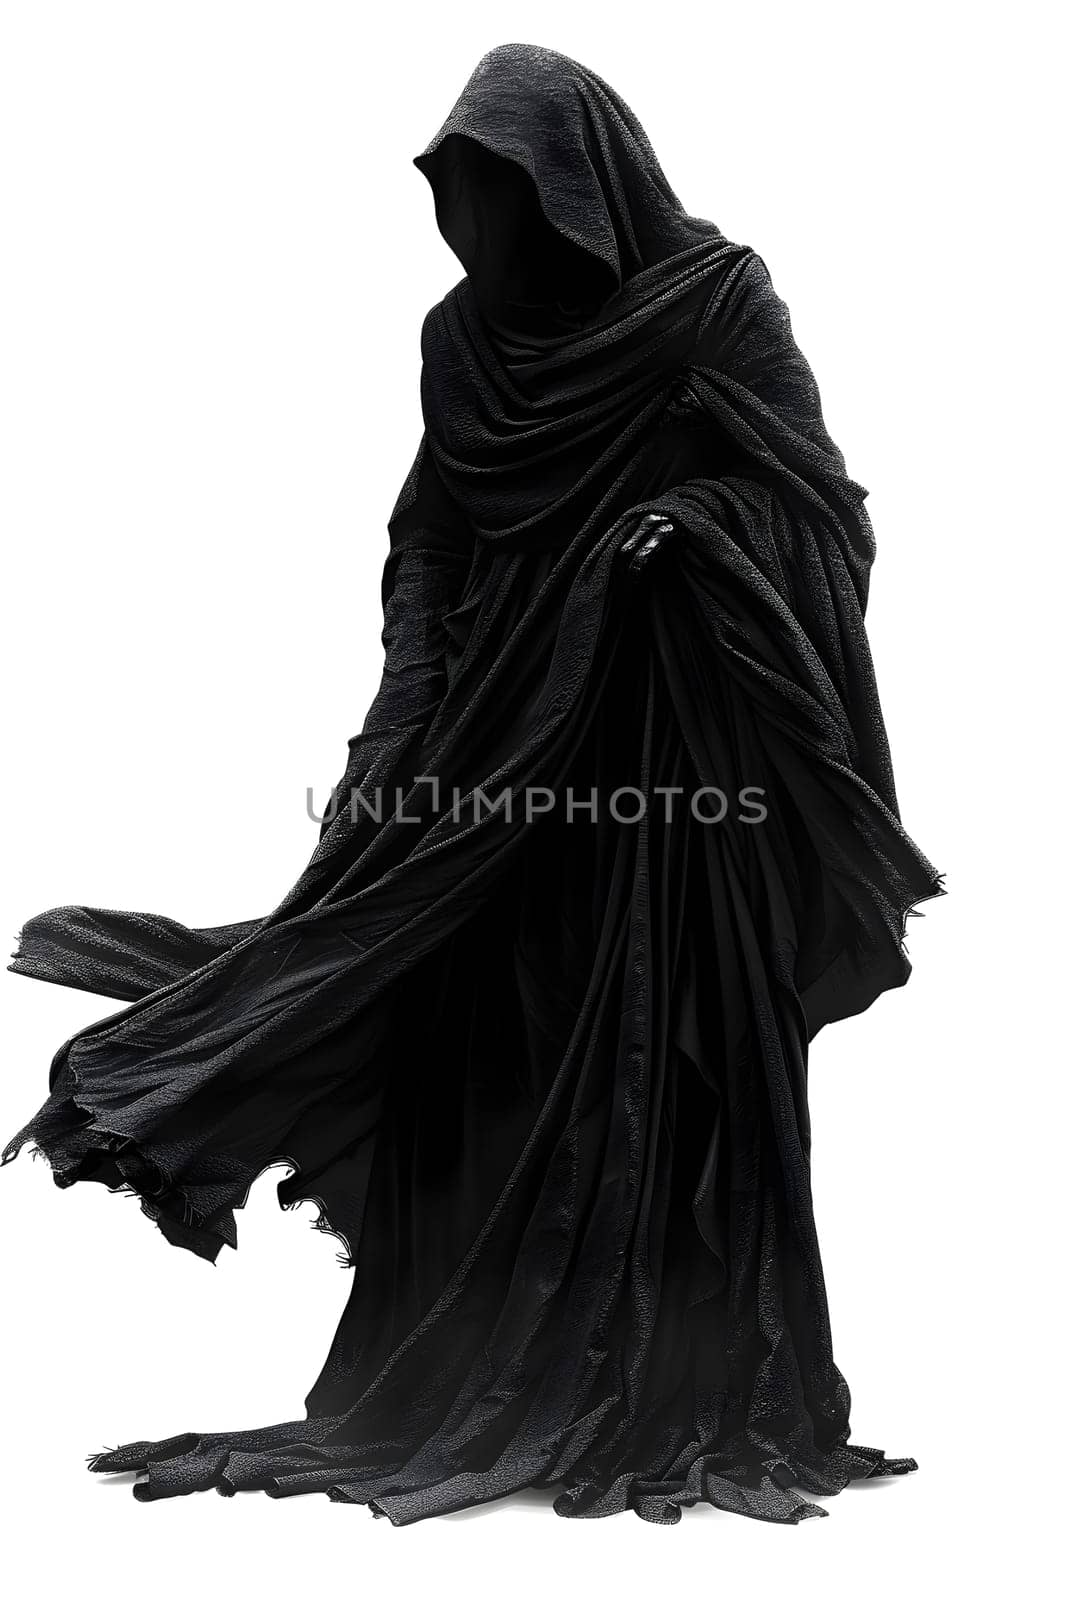 Artistic silhouette of grim reaper in electric blue robe fashion design by Nadtochiy